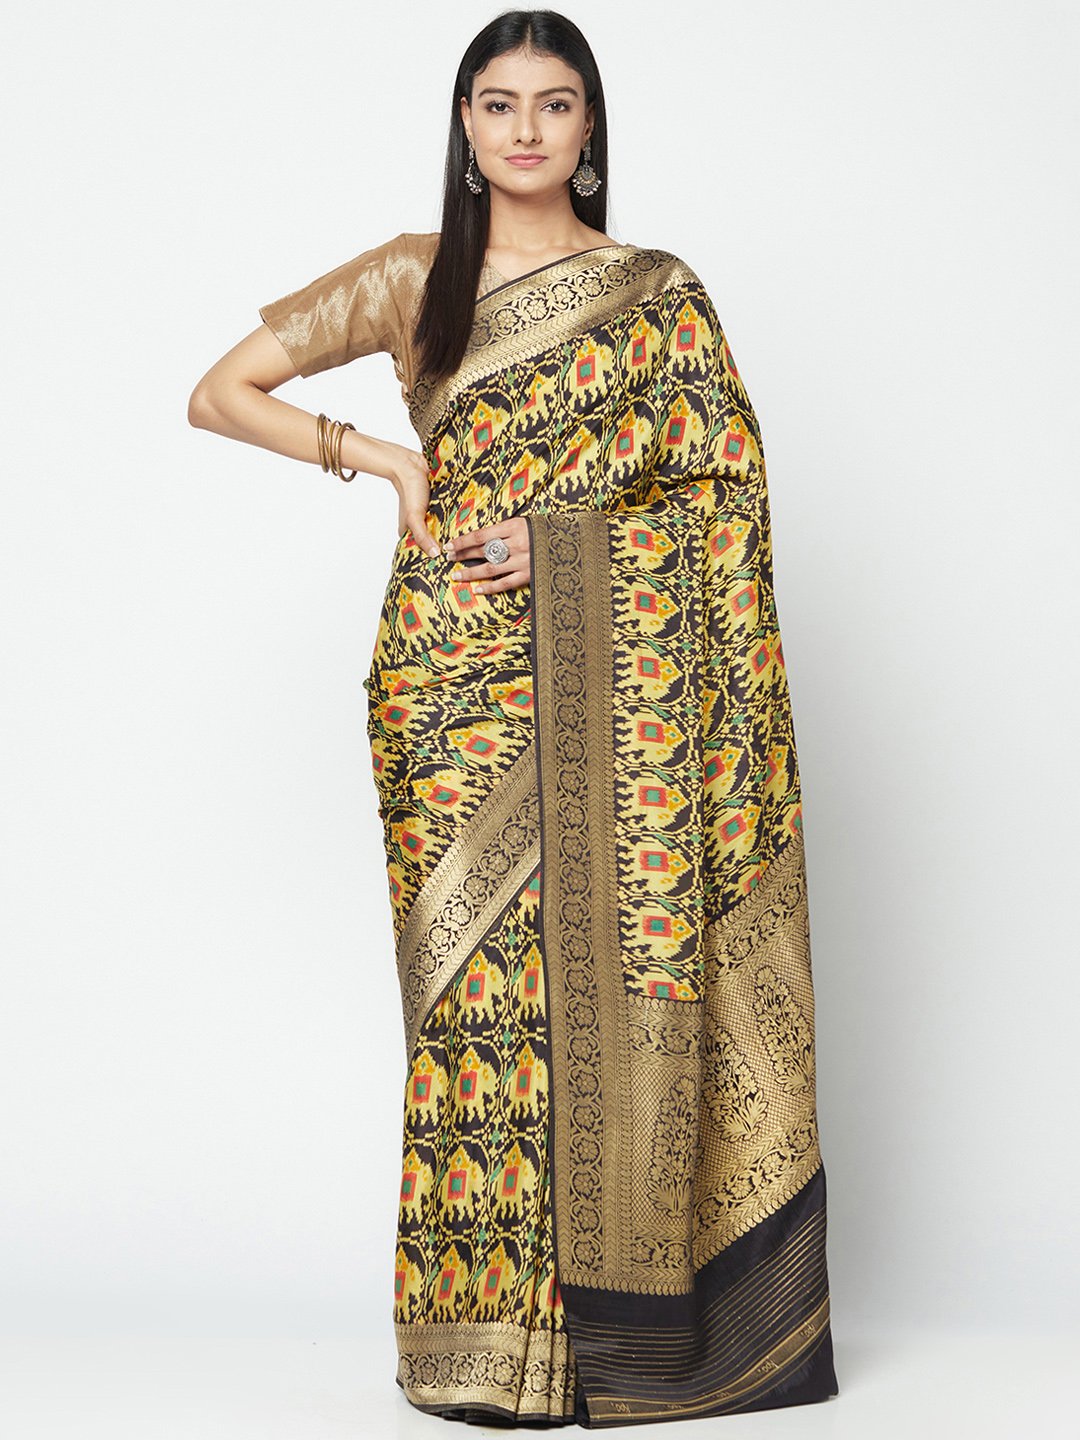 Shop Handloom Cotton Saree In Yellow Colour which is Saree online at simaaya At